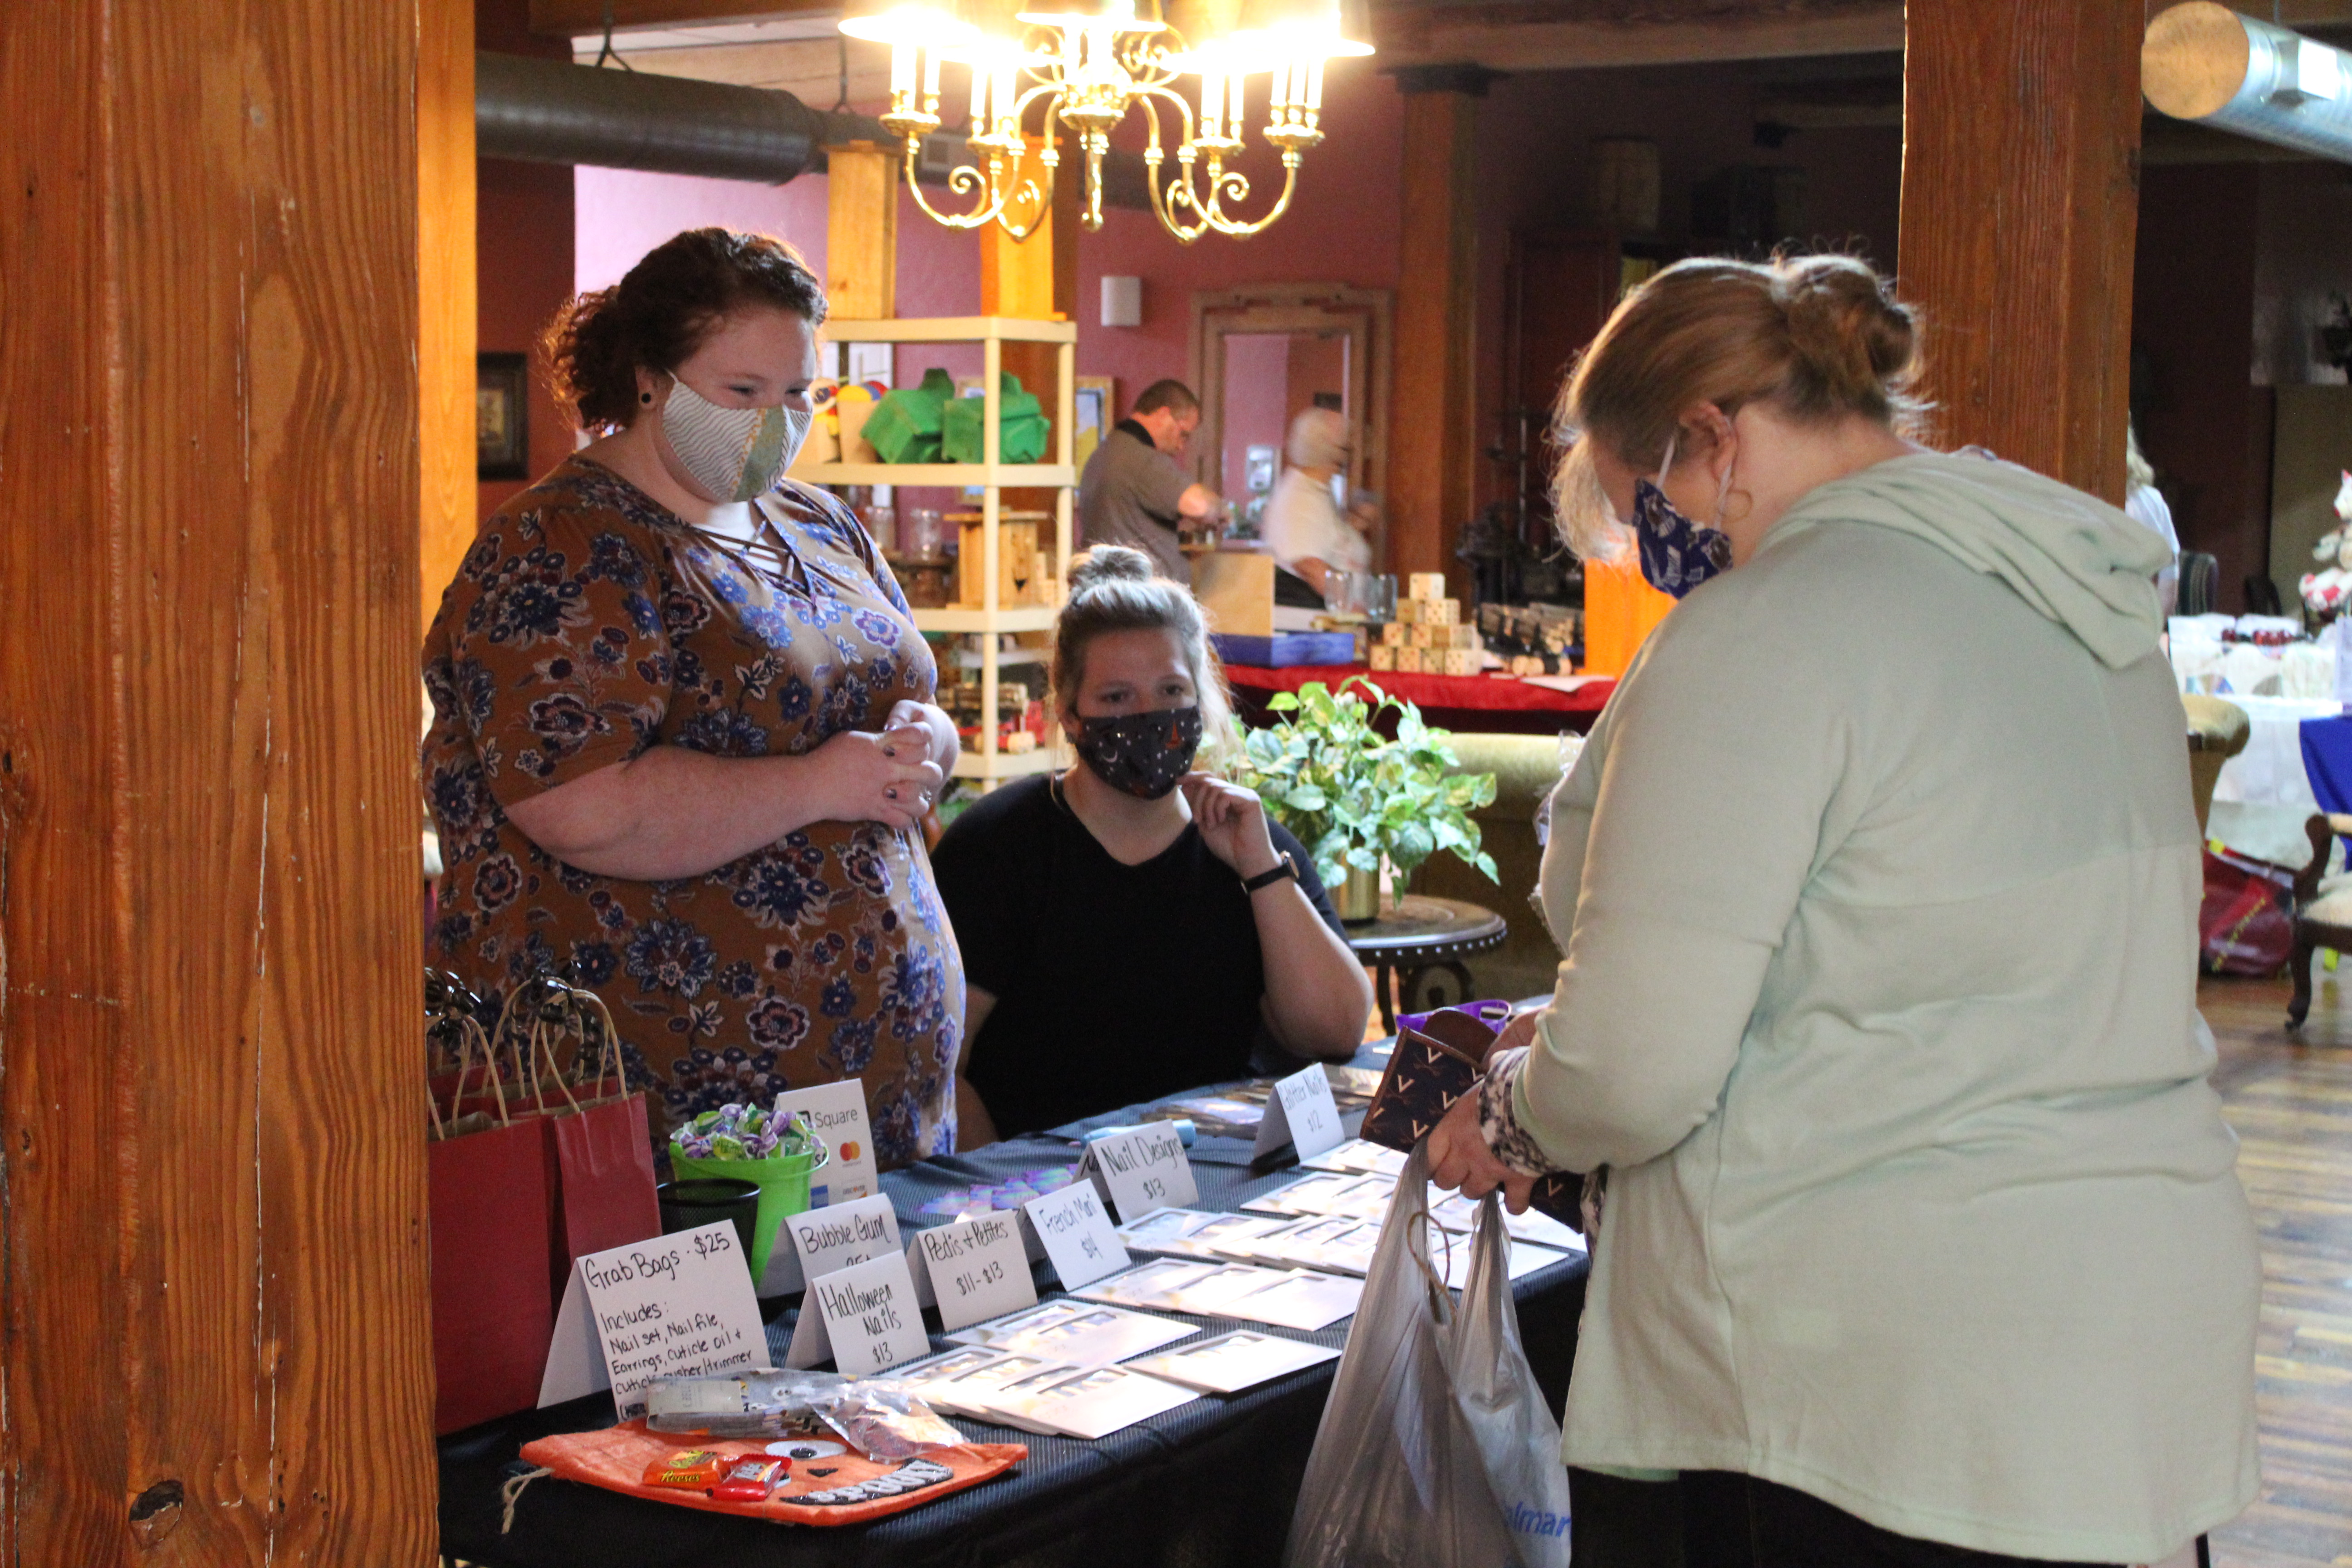 Dry nail polish vendor Courtney Sayles speaks about her product through her mask to a potential customer during the Spruce Pine Fall Festival at the Cross Street Commerce Center on Saturday, Oct. 10. The event is usually held in the Burnsville Town Center, which is currently closed due to the ongoing pandemic. The festival featured more than 40 vendors selling a variety of fall-themed items. (MNJ photo/Juliana Walker) 